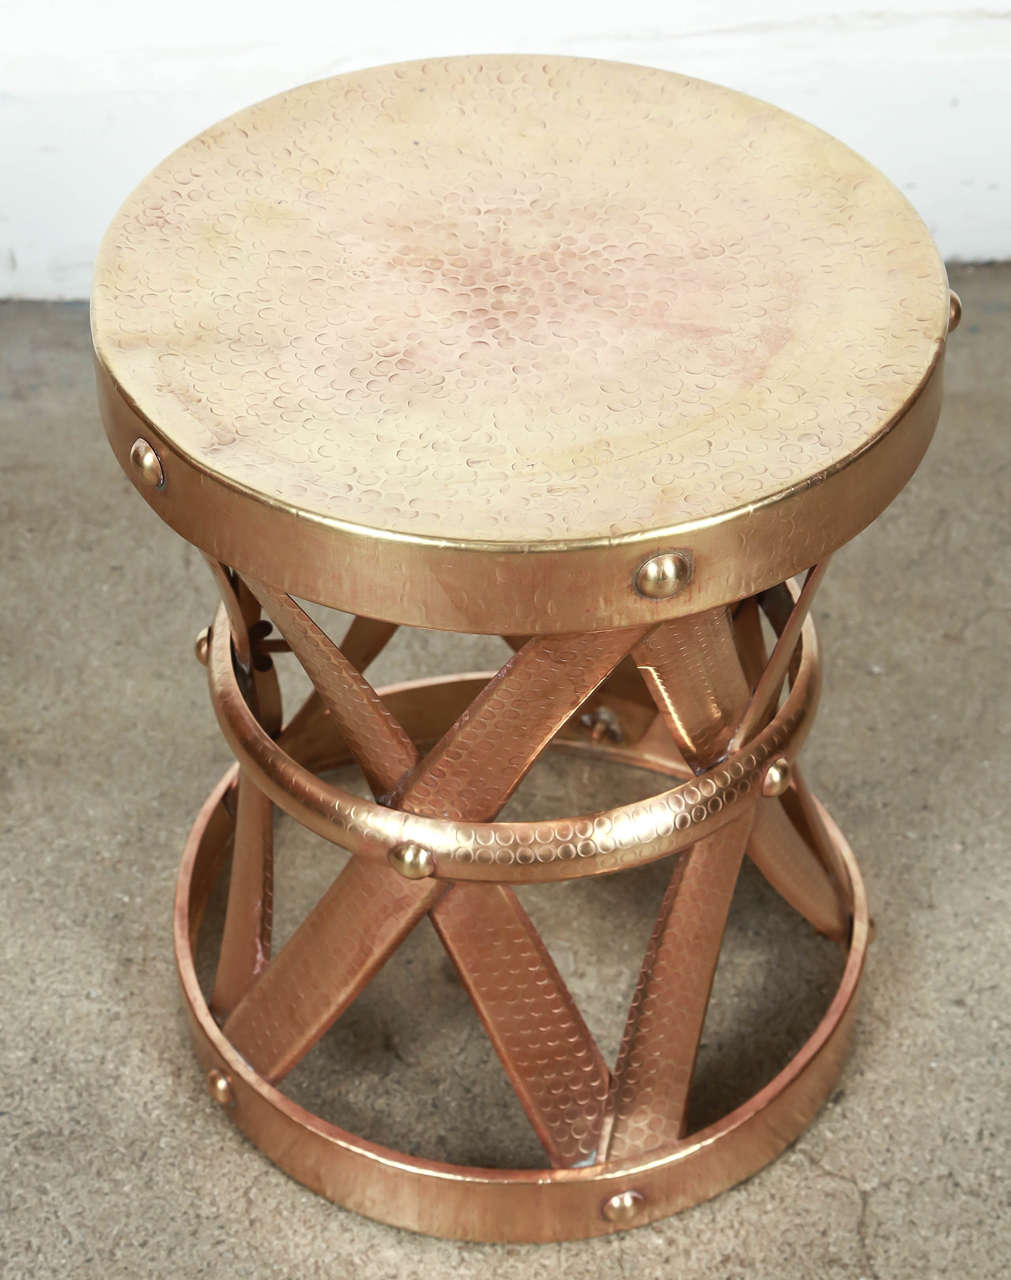 Very chic vintage hammered polished brass strap-work stool or side table with X-detailing in the Hollywood Regency style, USA, circa 1960.
Mid-Century Modern polished gold brass stool great to use indoor or outdoor as a stool or end table.
Has some